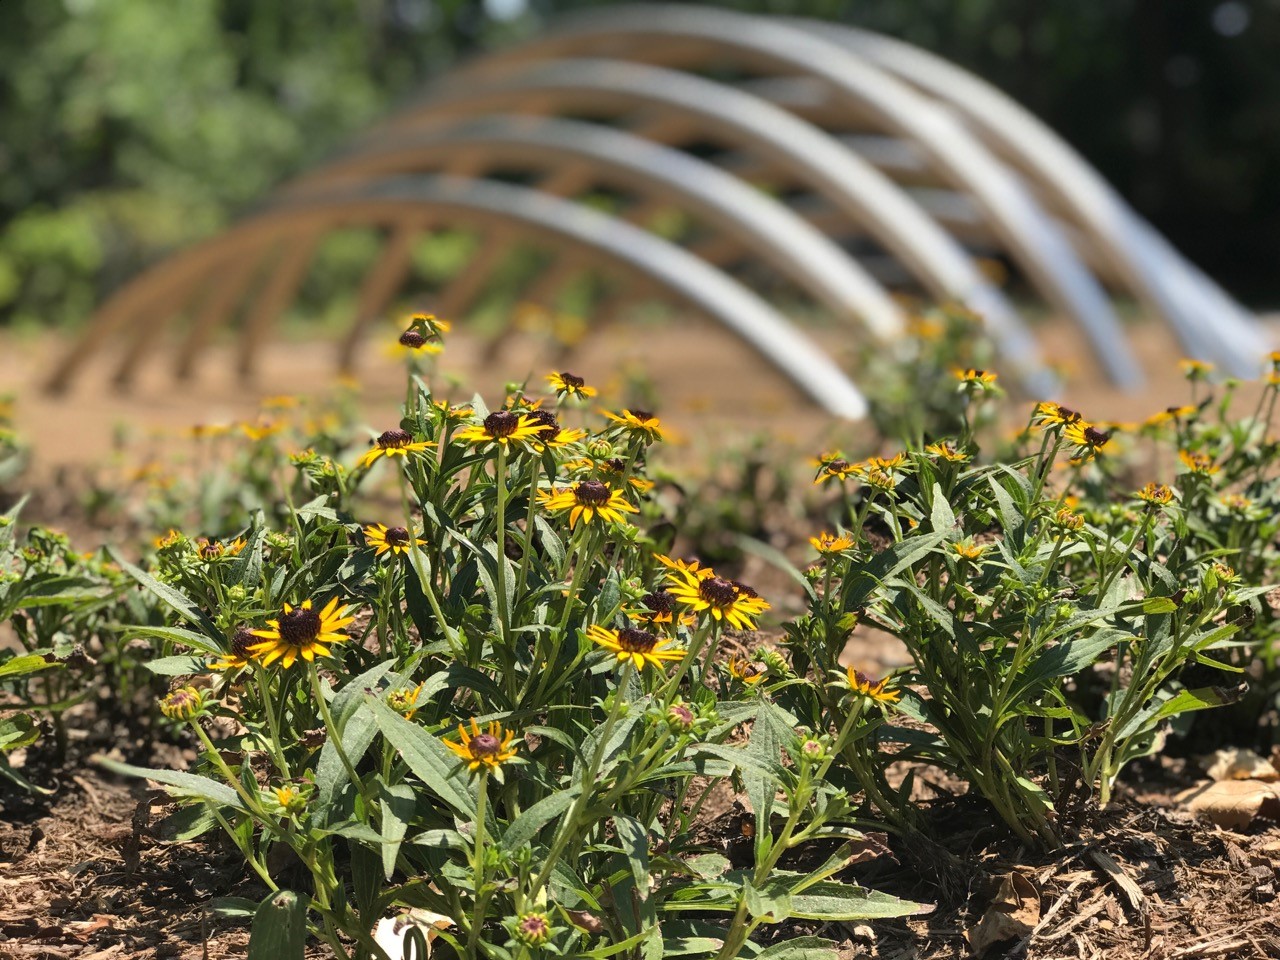 New butterfly garden, pavilion, sculpture and walking paths ready to enjoy in Minturn Park!